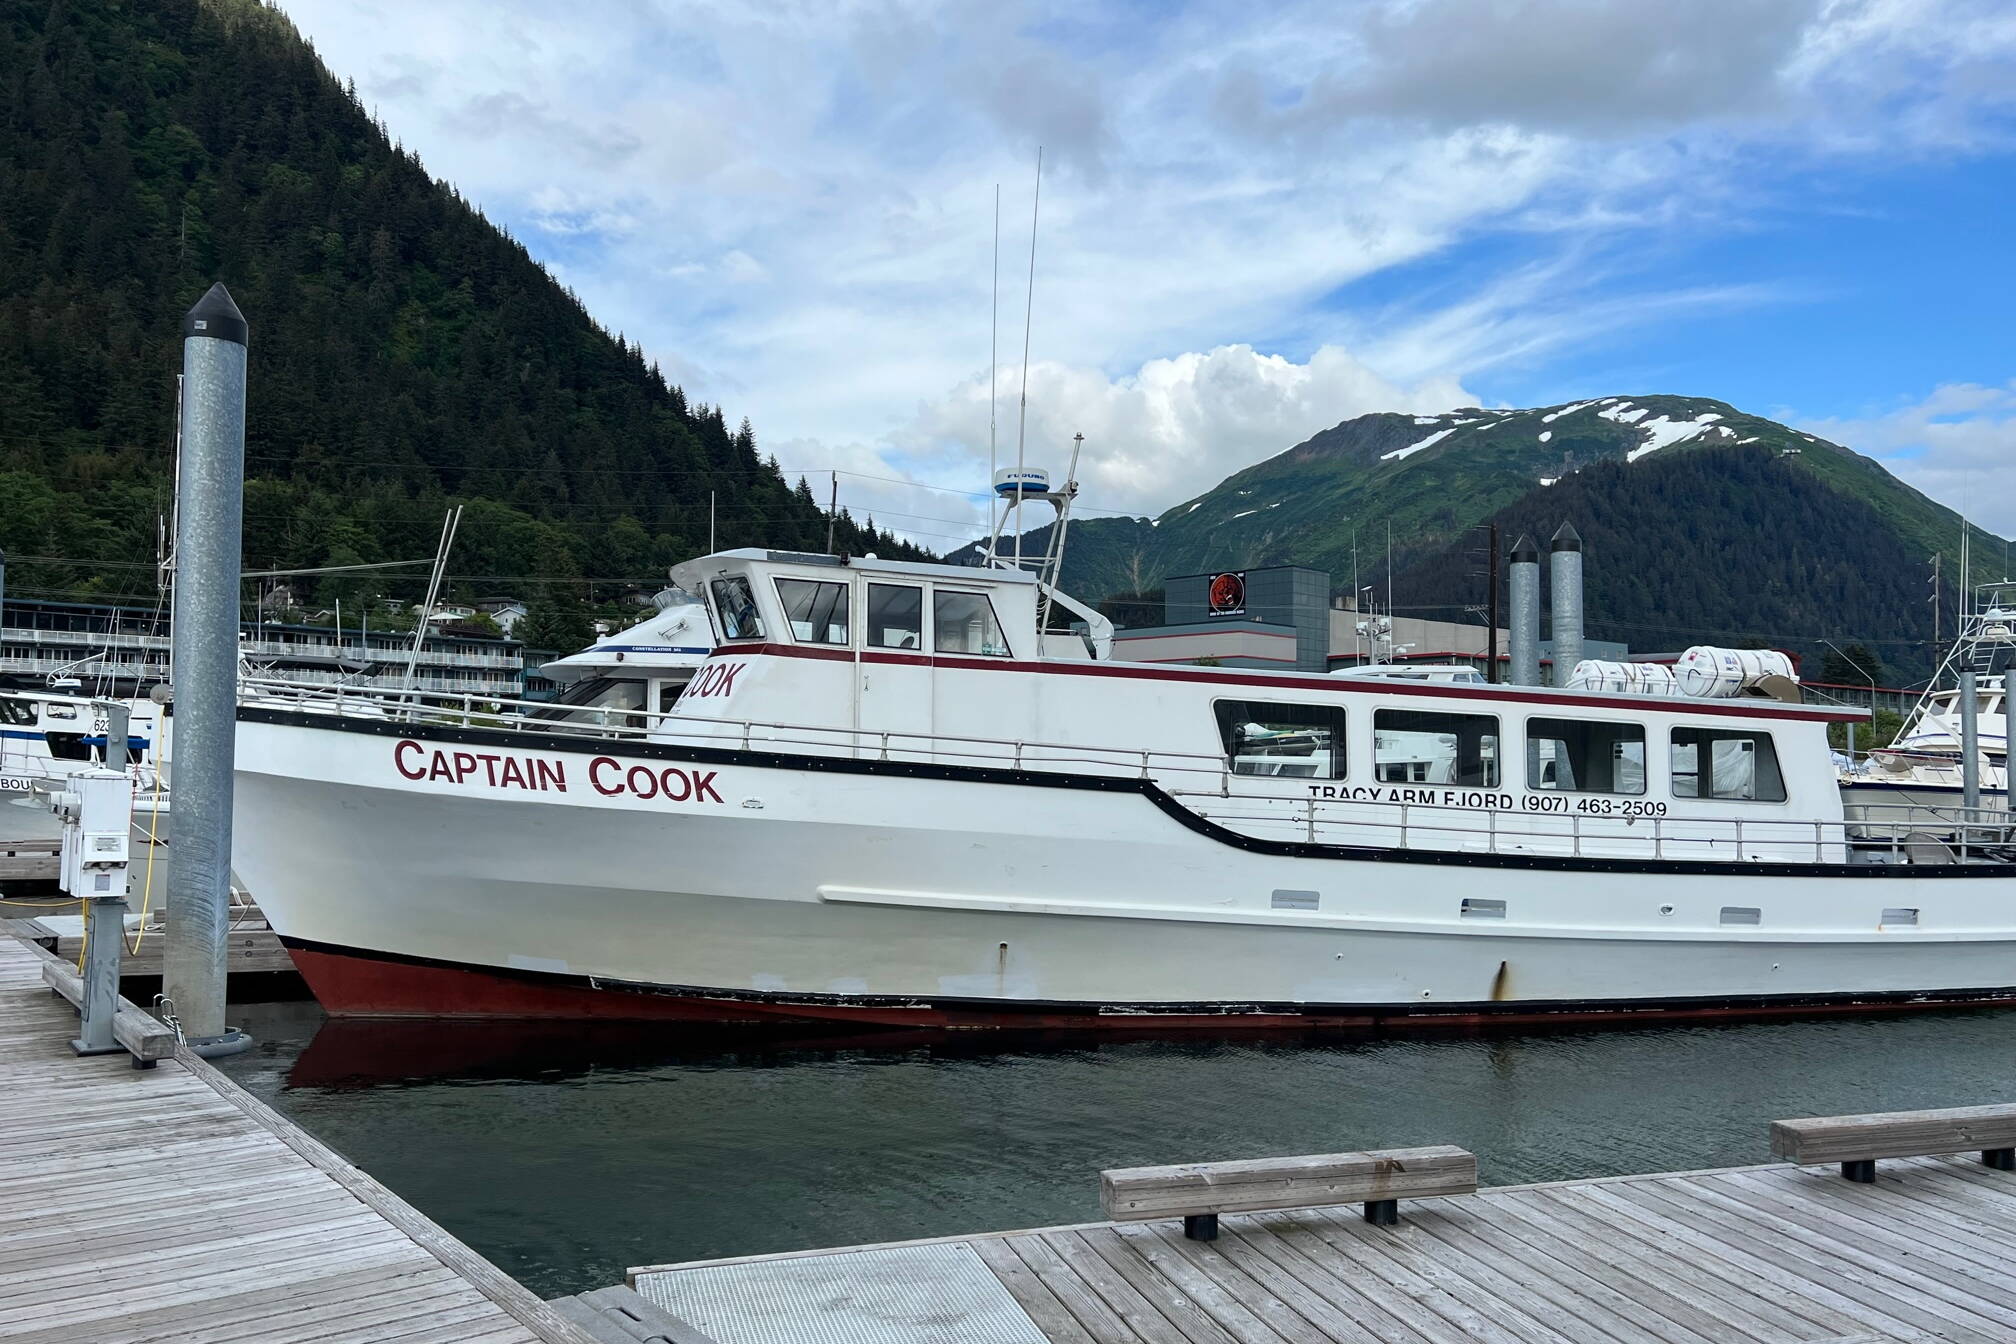 The Captain Cook, one of two tour boats operated by Adventure Bound Alaska, is seen here docked at Aurora Harbor on July 25. The company is facing numerous consumer complaints and legal action involving allegations of canceled trips that were not refunded and unpaid bills. (Meredith Jordan / Juneau Empire)